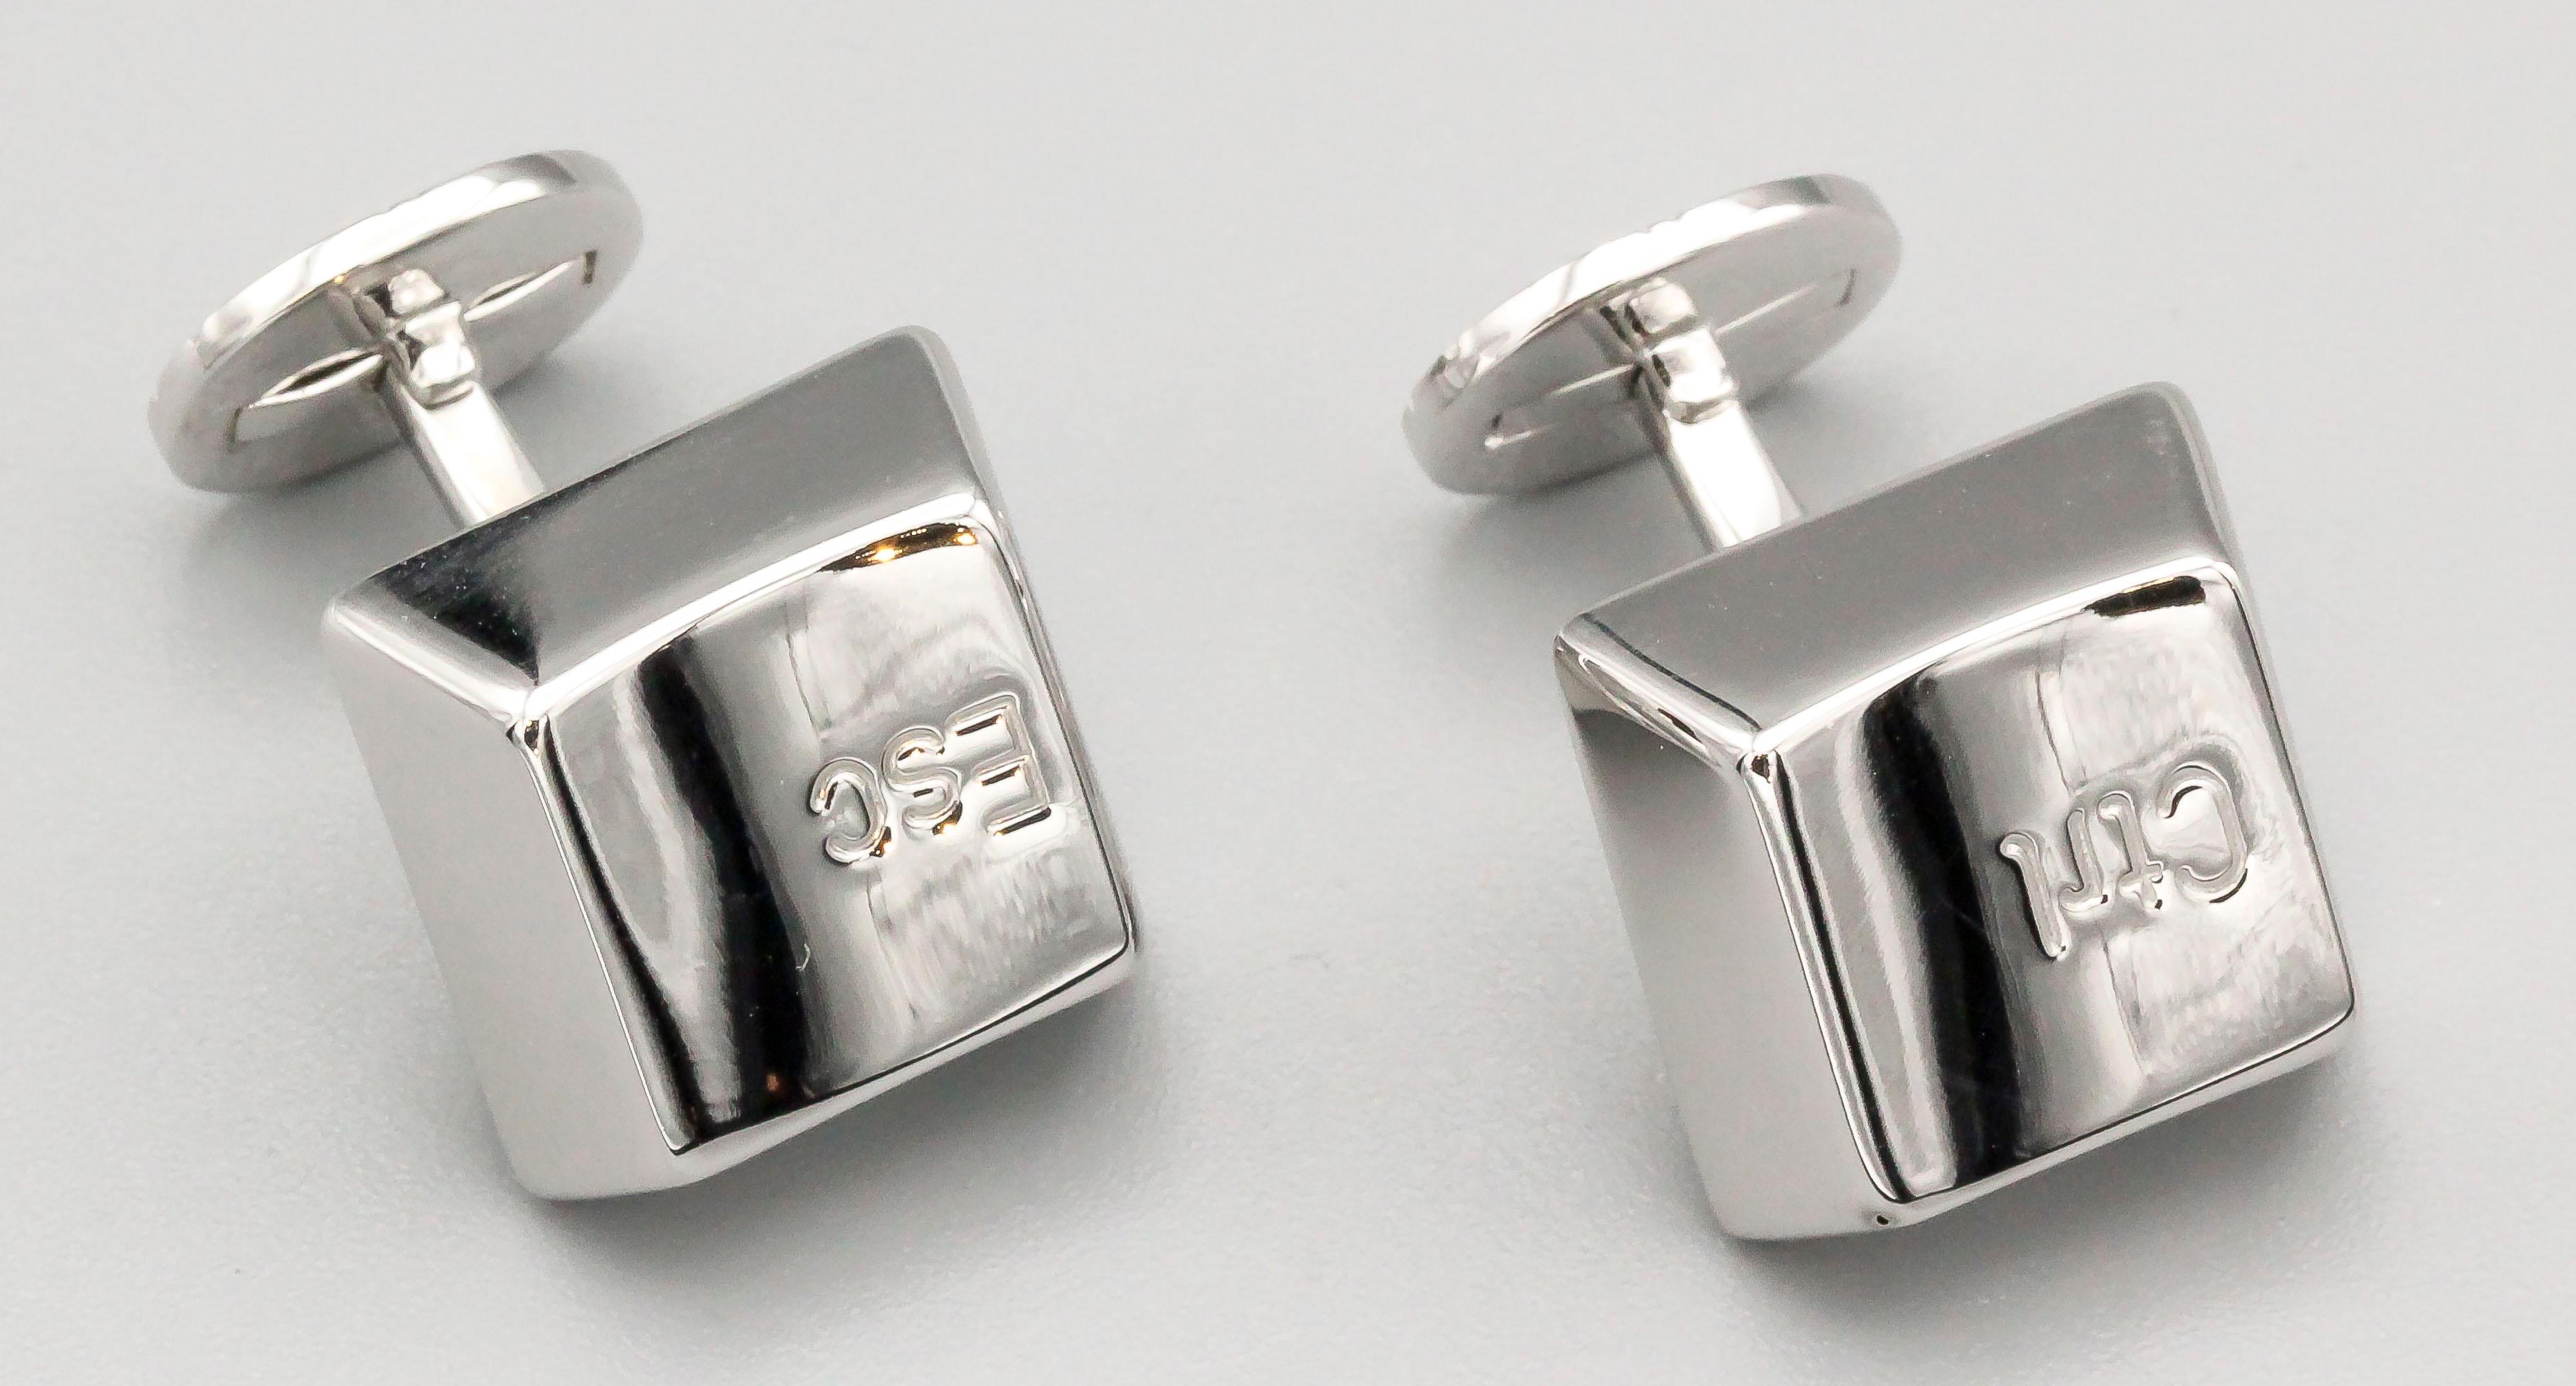 Unusual 18K white gold cufflinks by Cartier. They resemble computer keys, one side says 